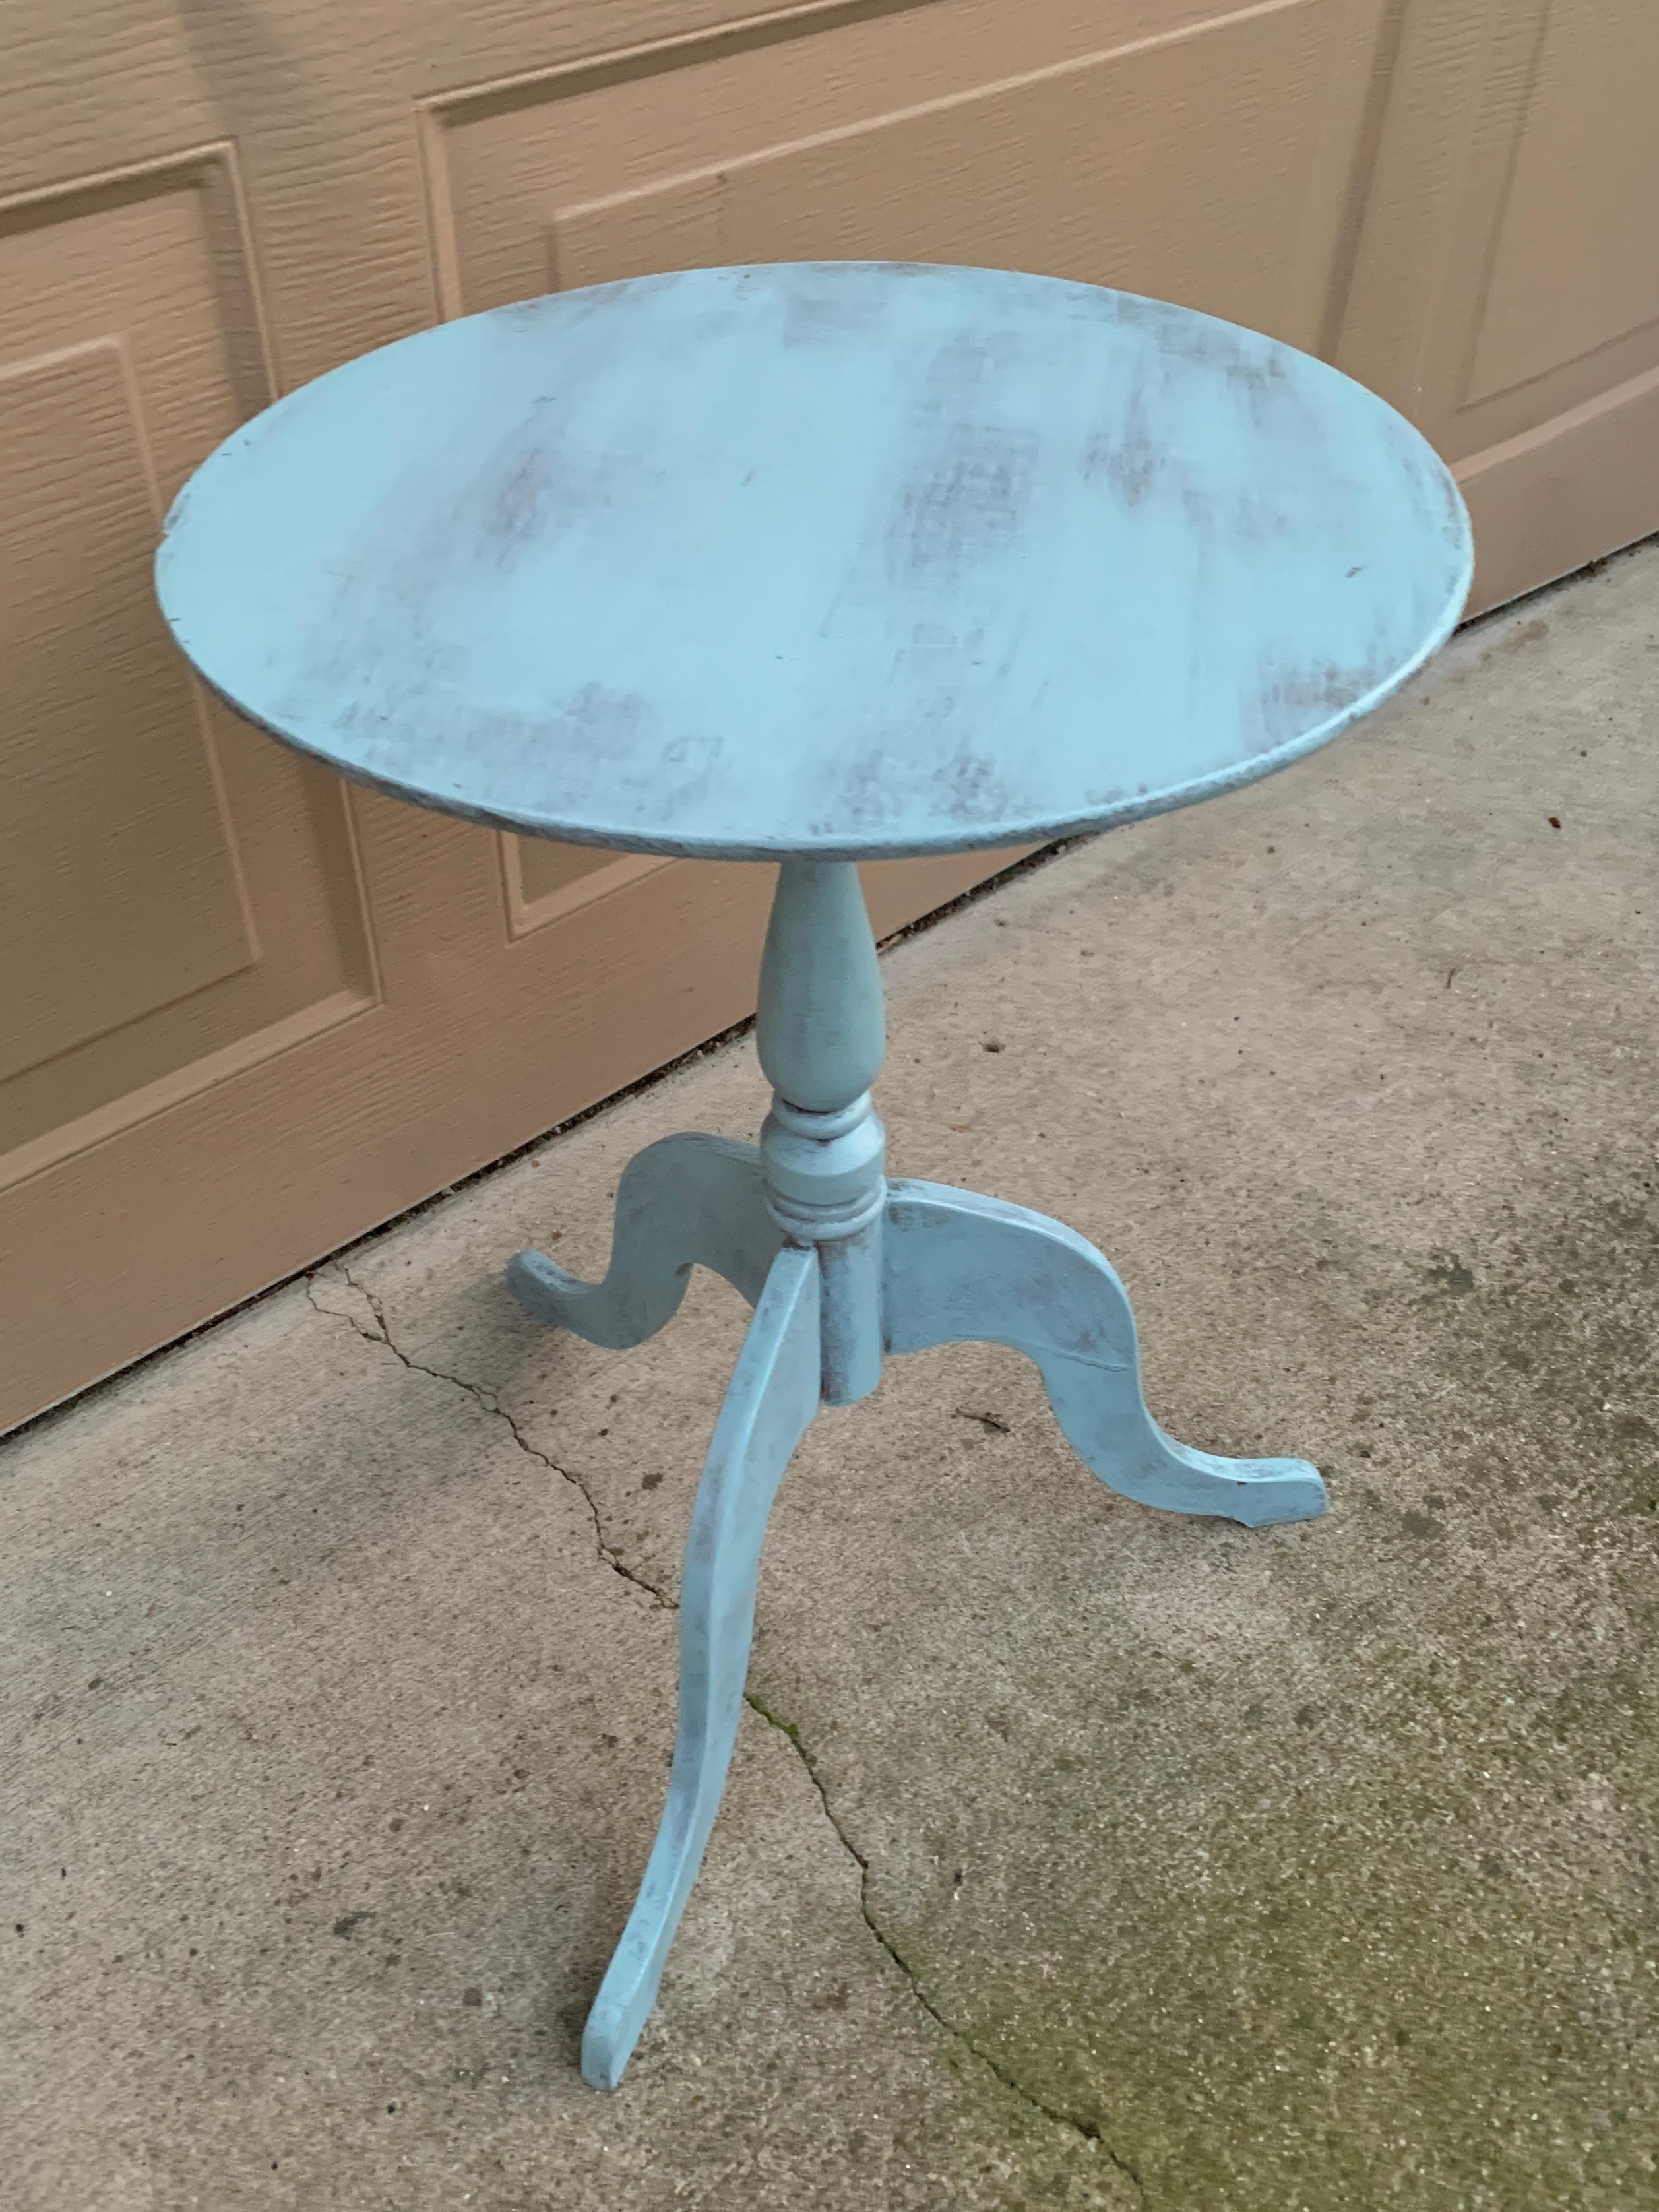 Antique American Regency Round Painted Walnut Side Table, Early 20th Century For Sale 2